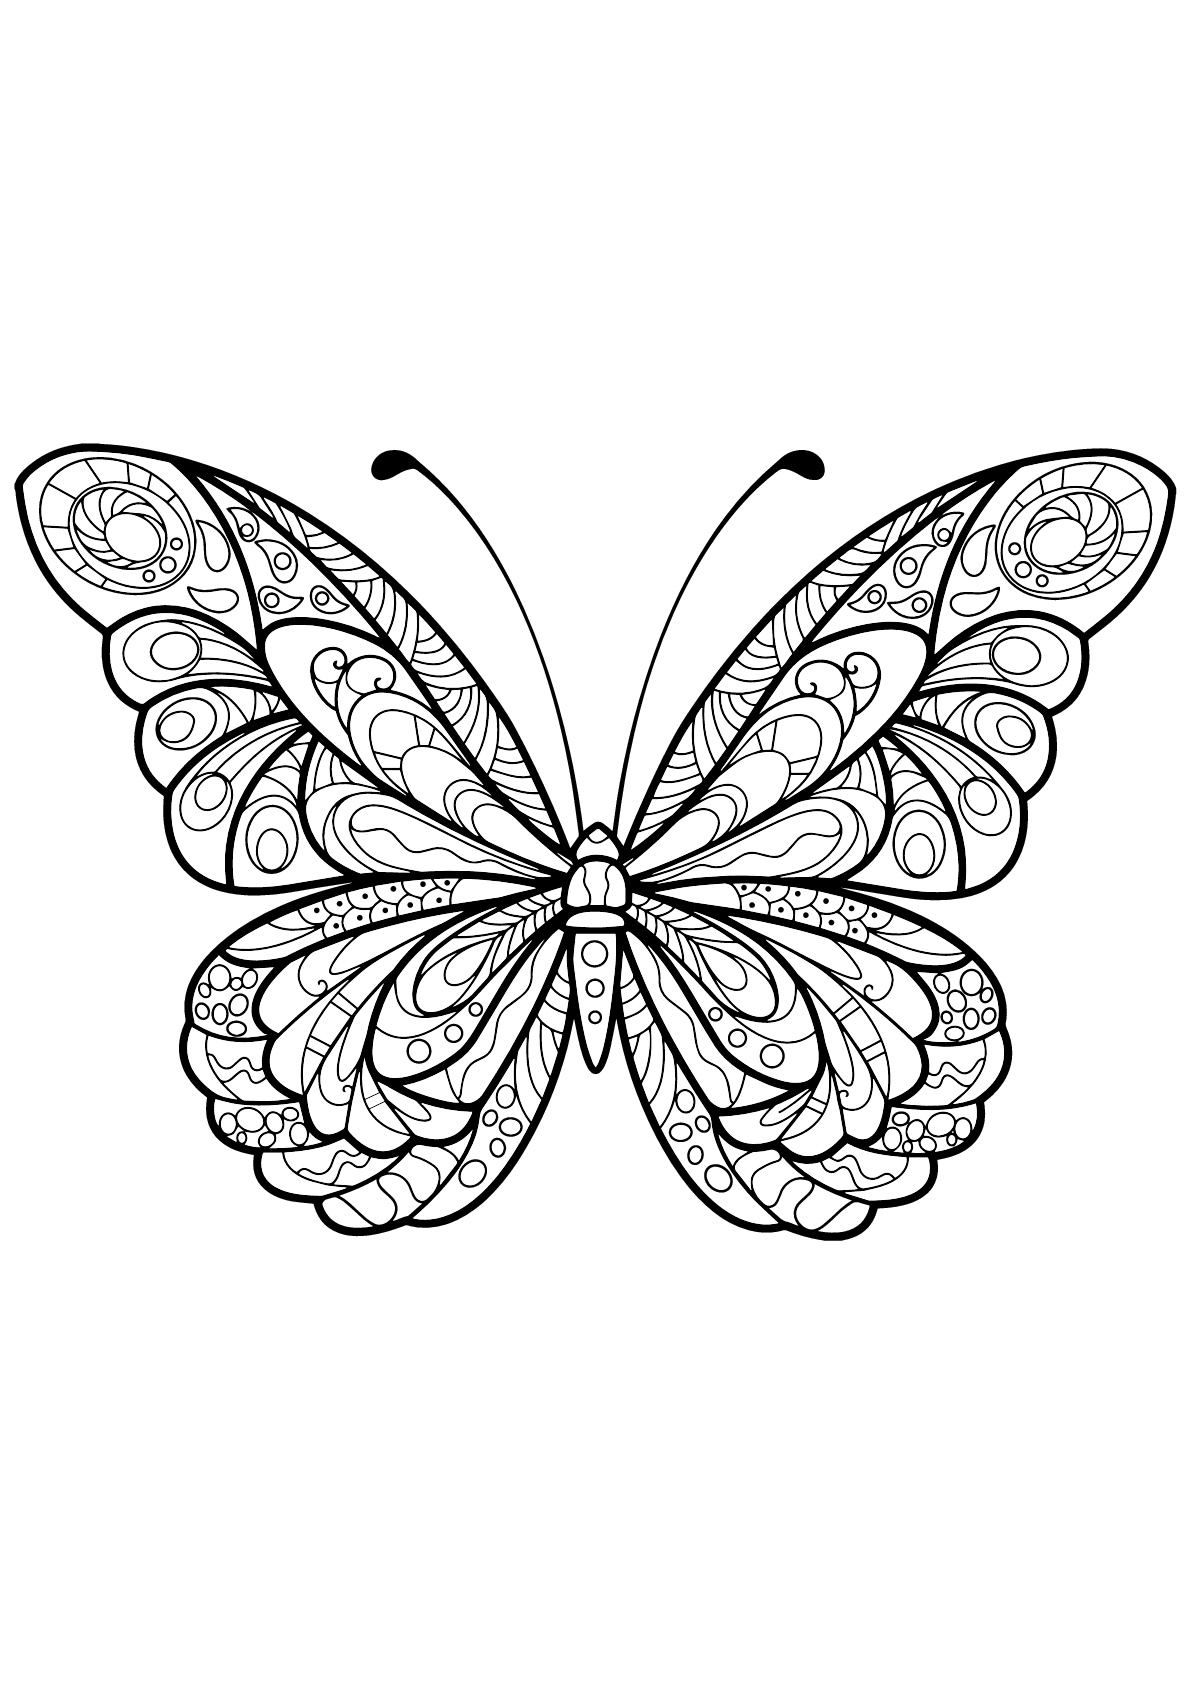 Download Butterfly beautiful patterns 5 - Butterflies & insects Adult Coloring Pages